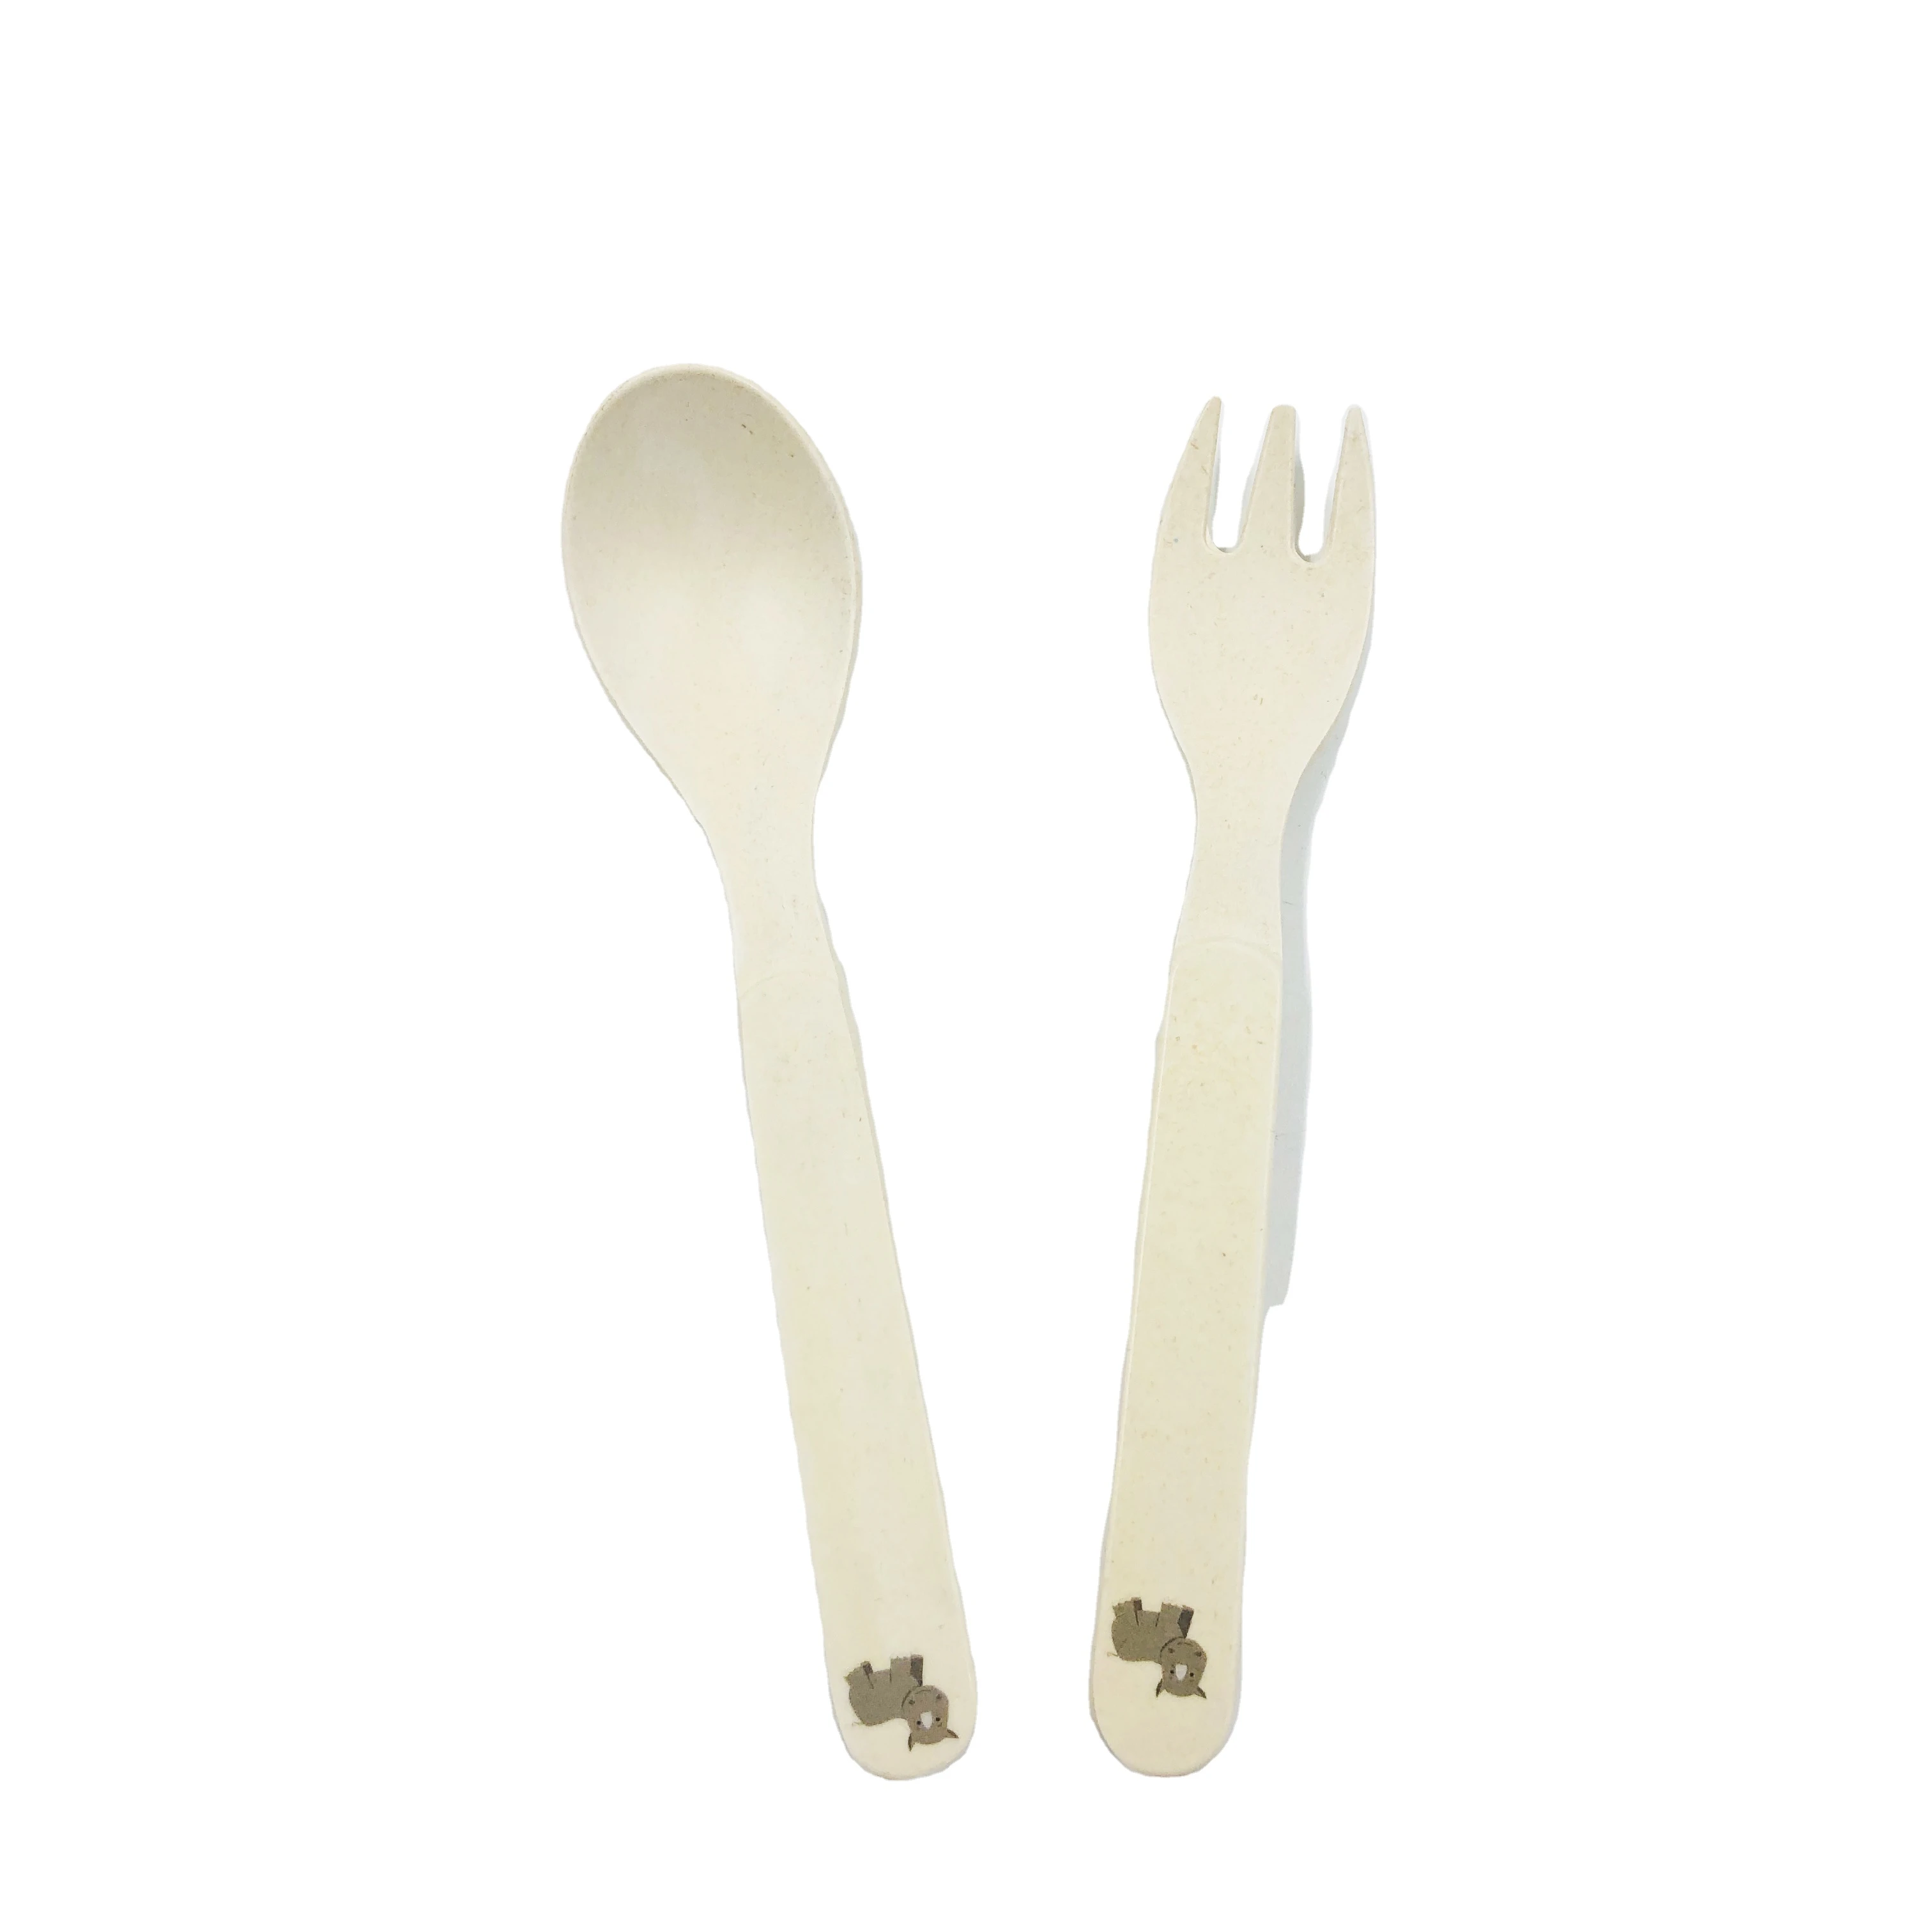 Biodegradable bamboo fiber party tableware set reusable spoon and fork cutlery